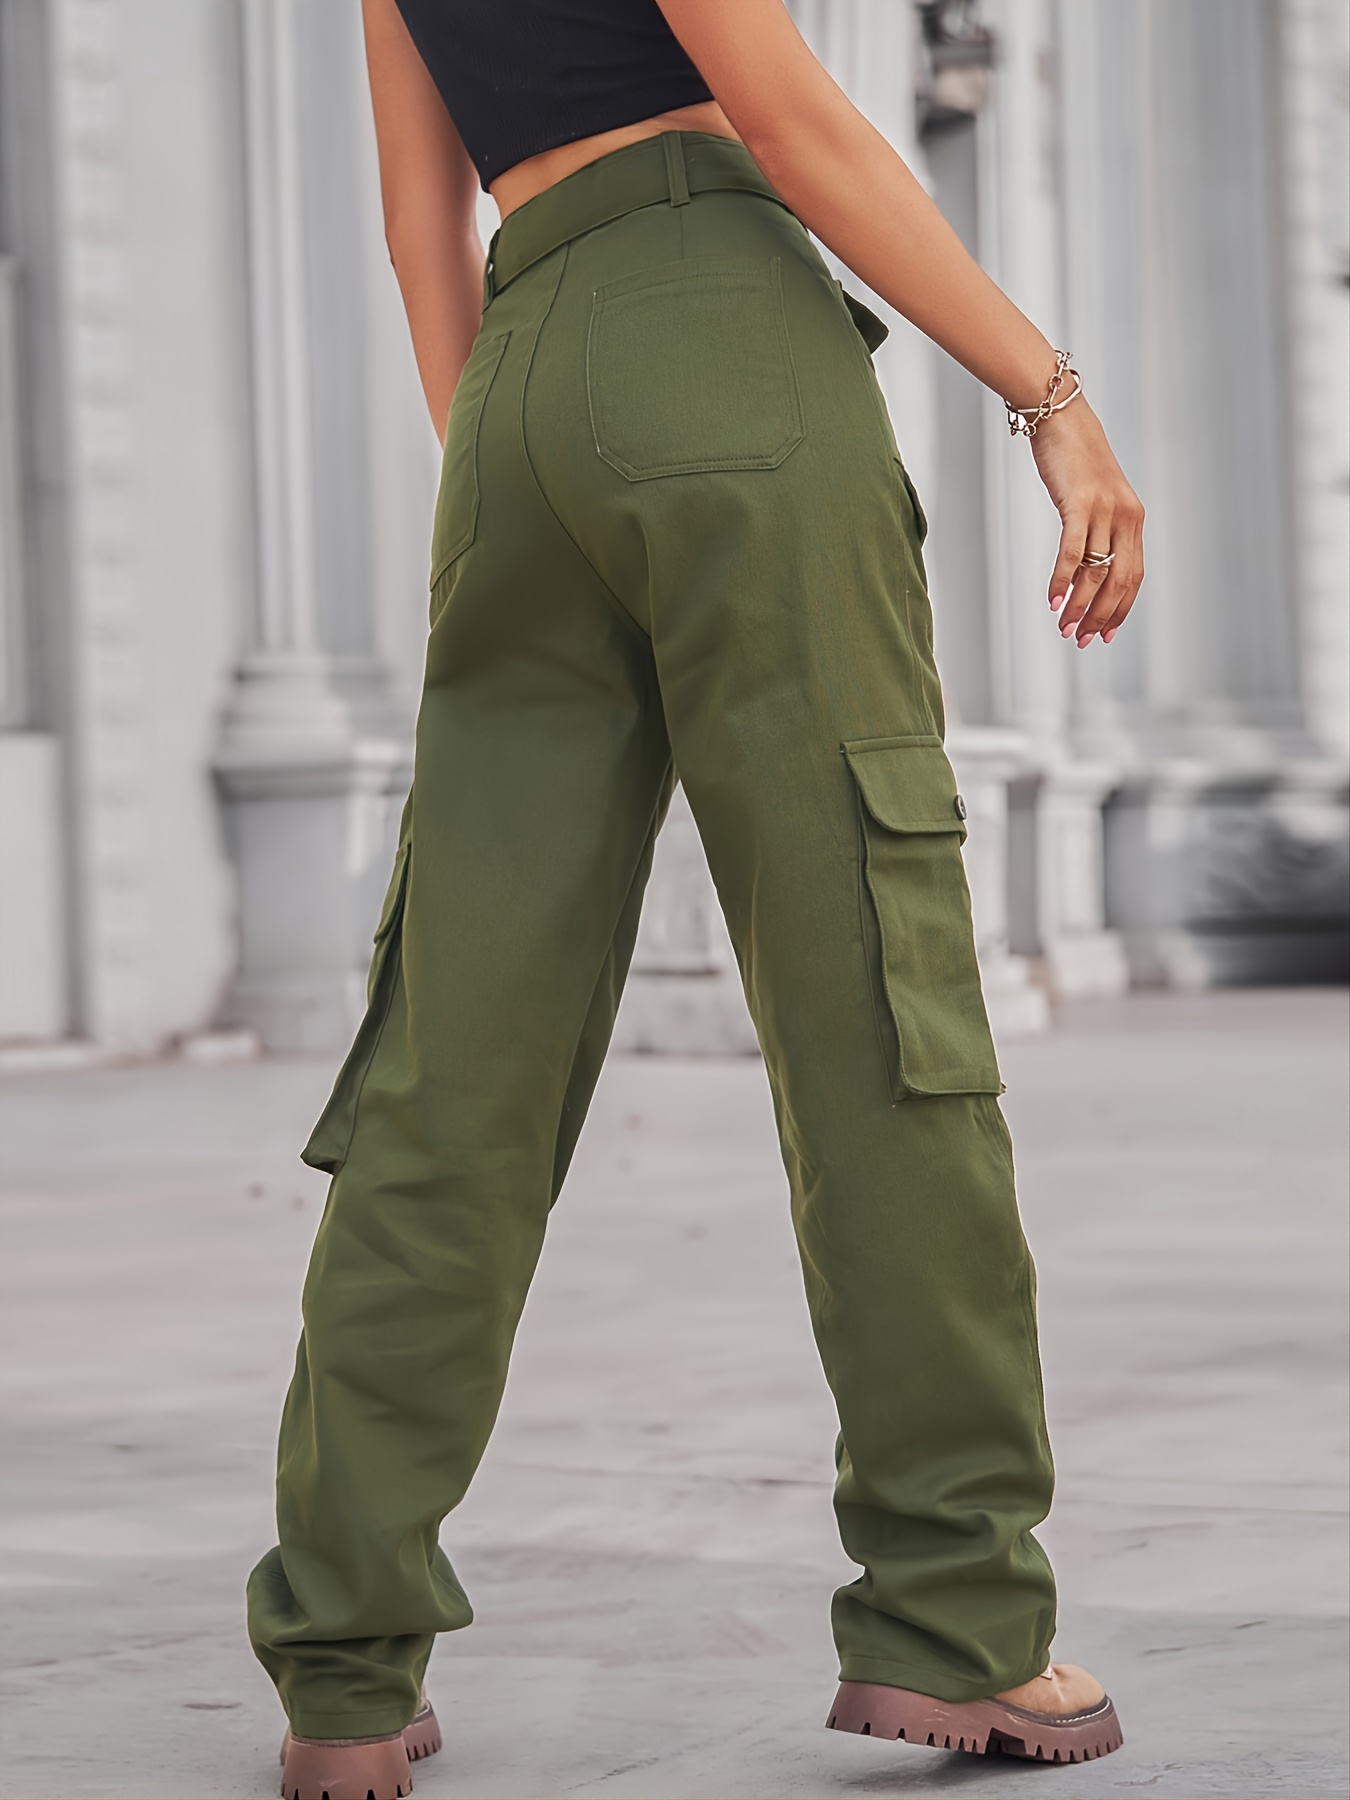 Women's Baggy Cargo Pants Clothing Multi Pocket Relaxed Fit Jeans